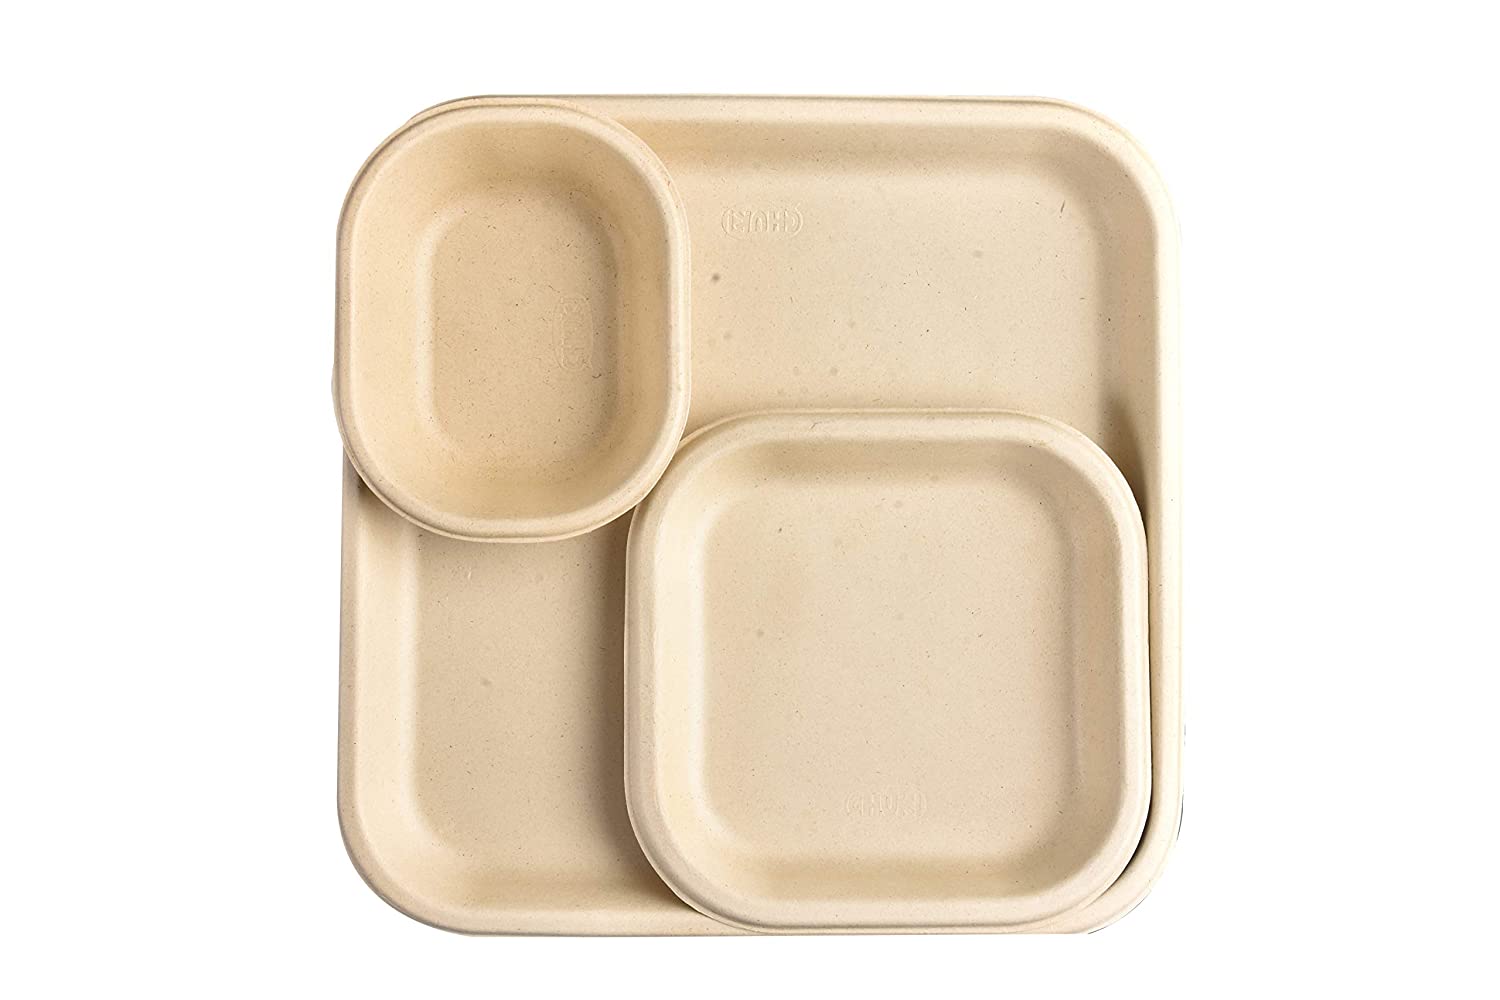 Chuk BioDegradable Disposable and Eco-Friendly Meal Tray (3 Compartment) –  Set of 25